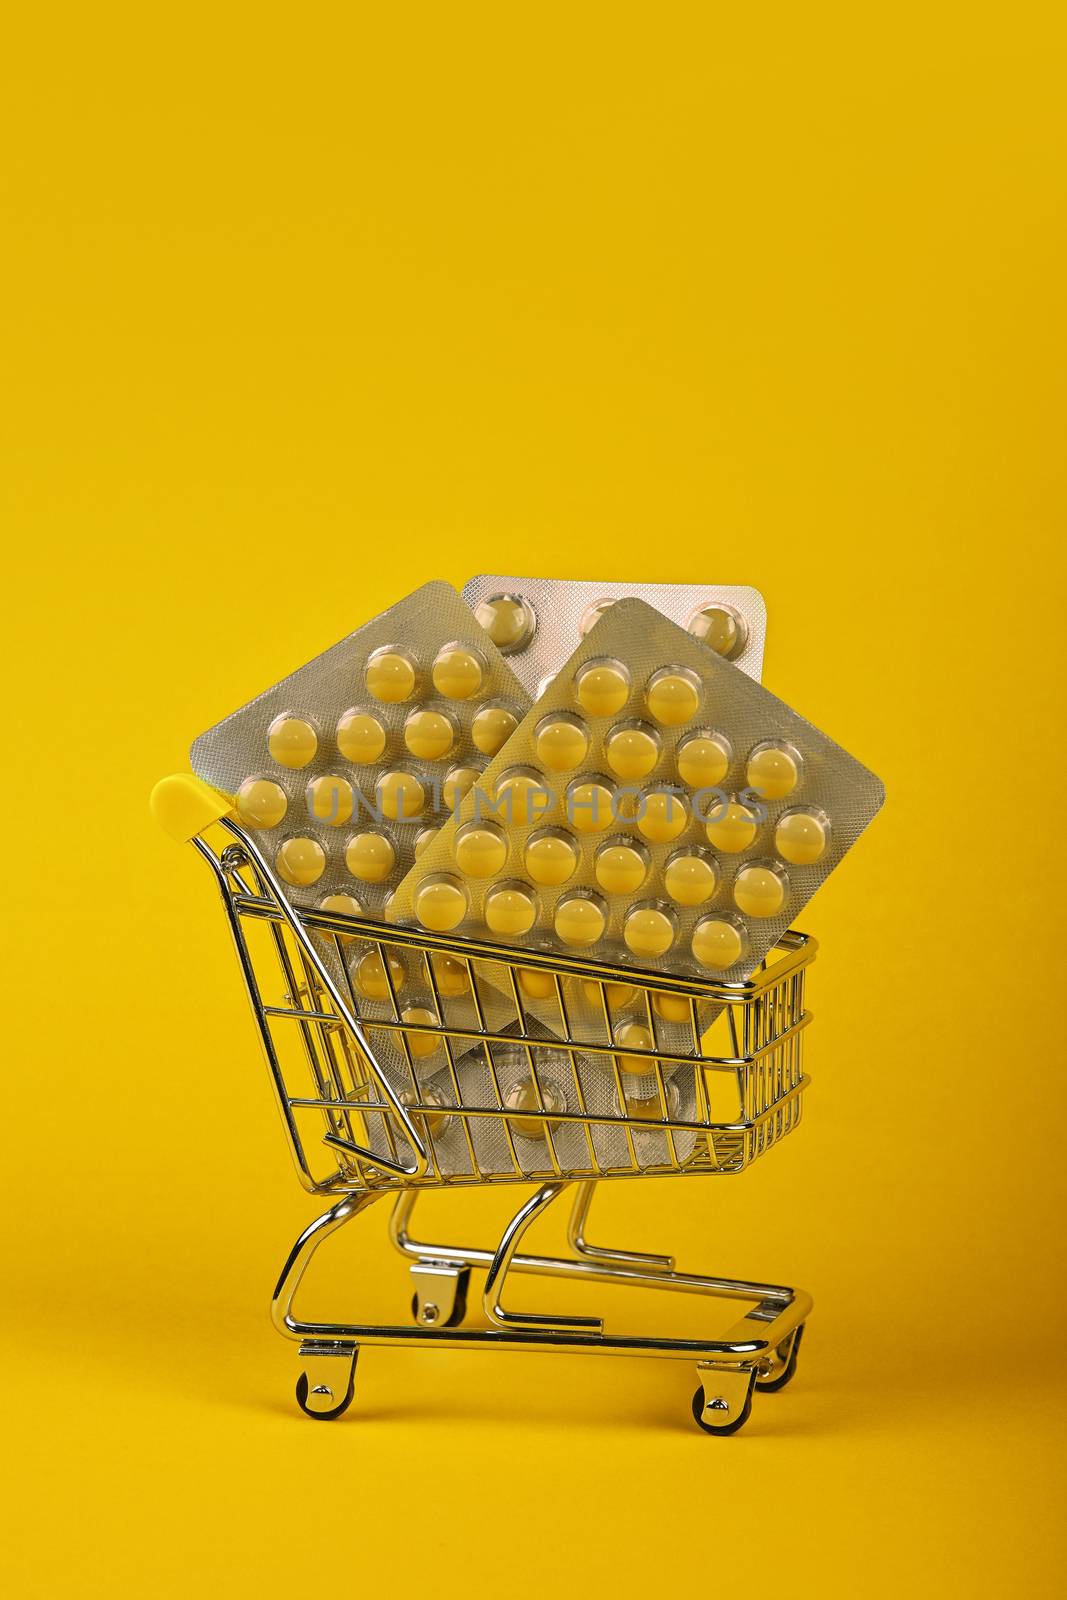 Close up several different blister packs of pills in small shopping cart over yellow background, concept of online medicine order delivery, low angle view